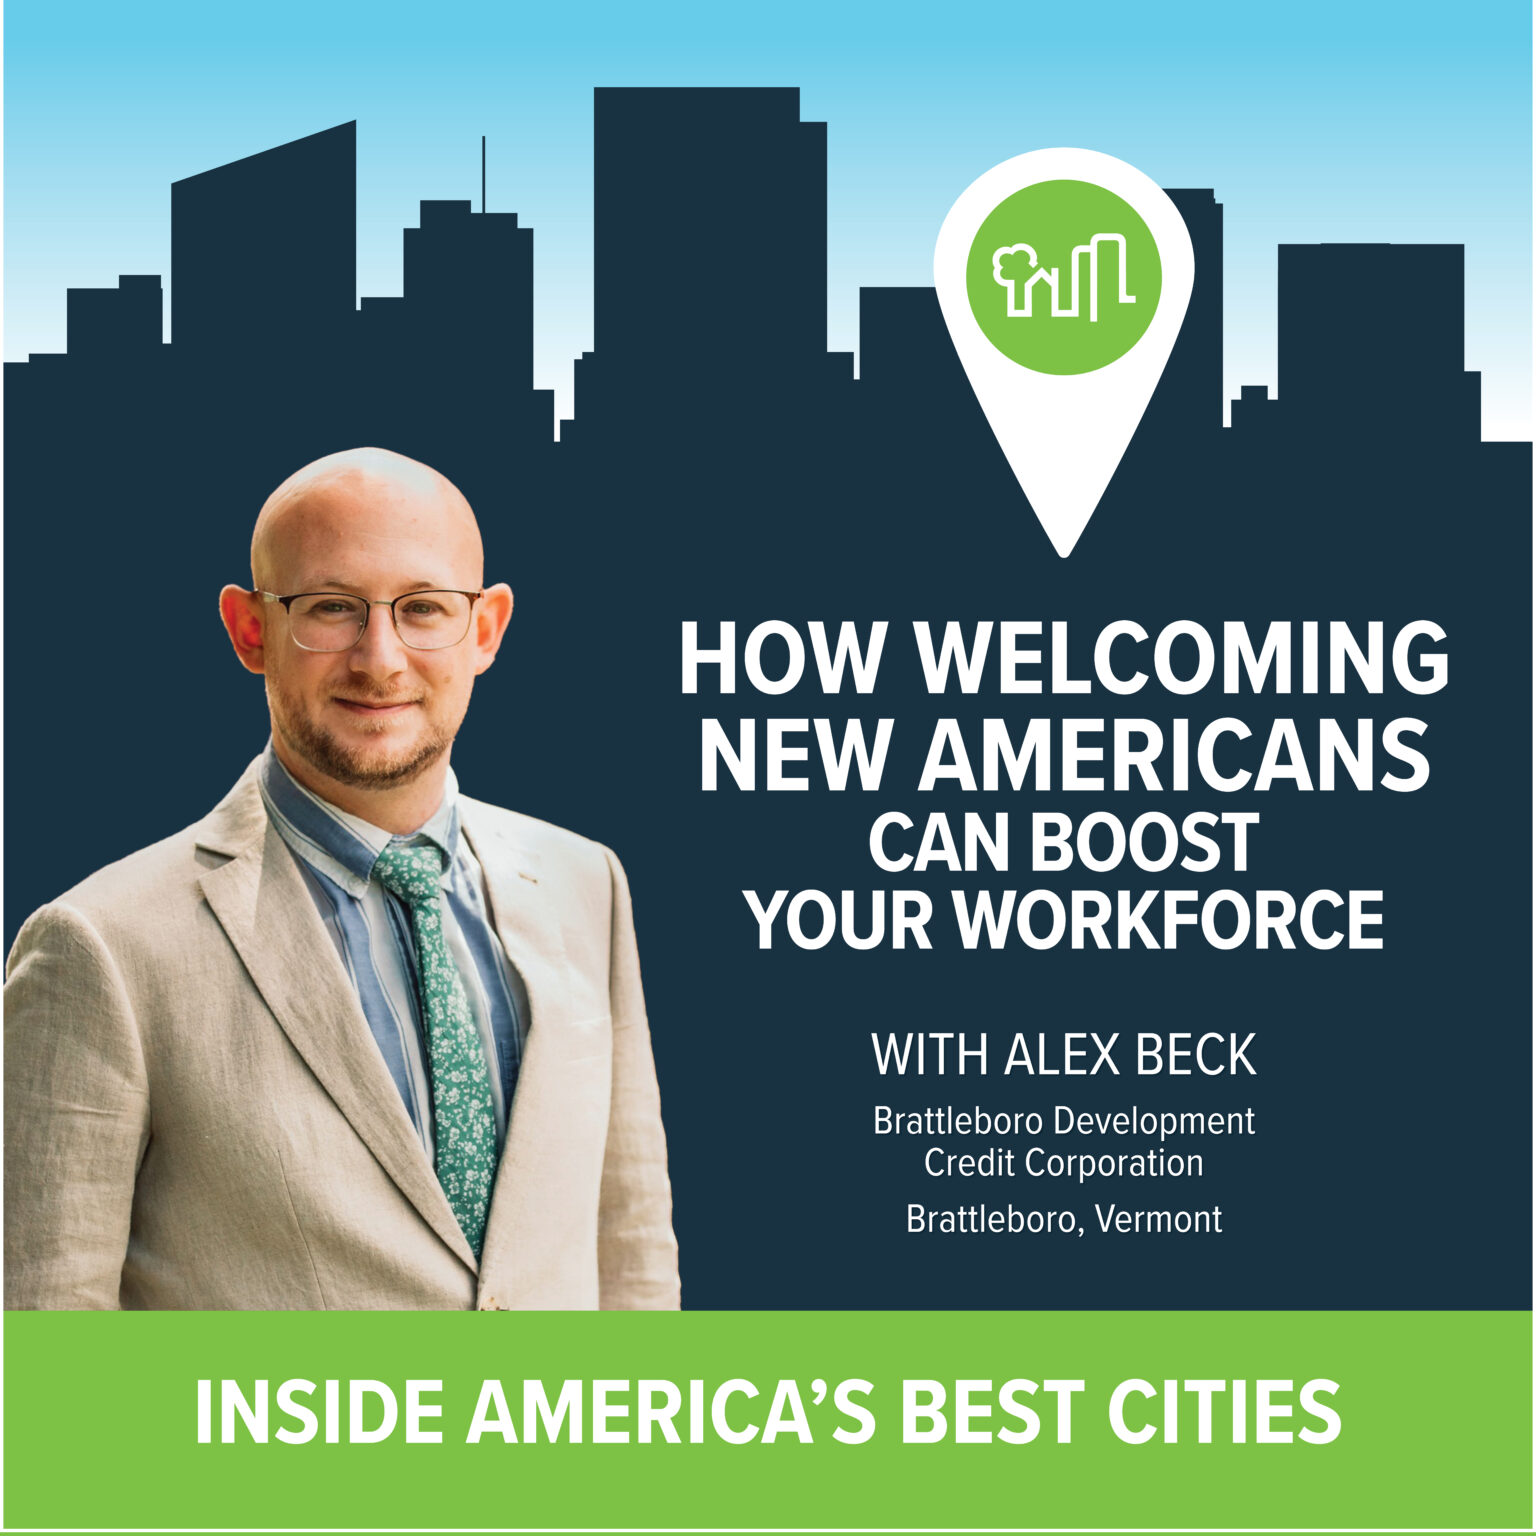 Welcoming Communities Featured On Livability’s “Inside America’s Best Cities” Podcast